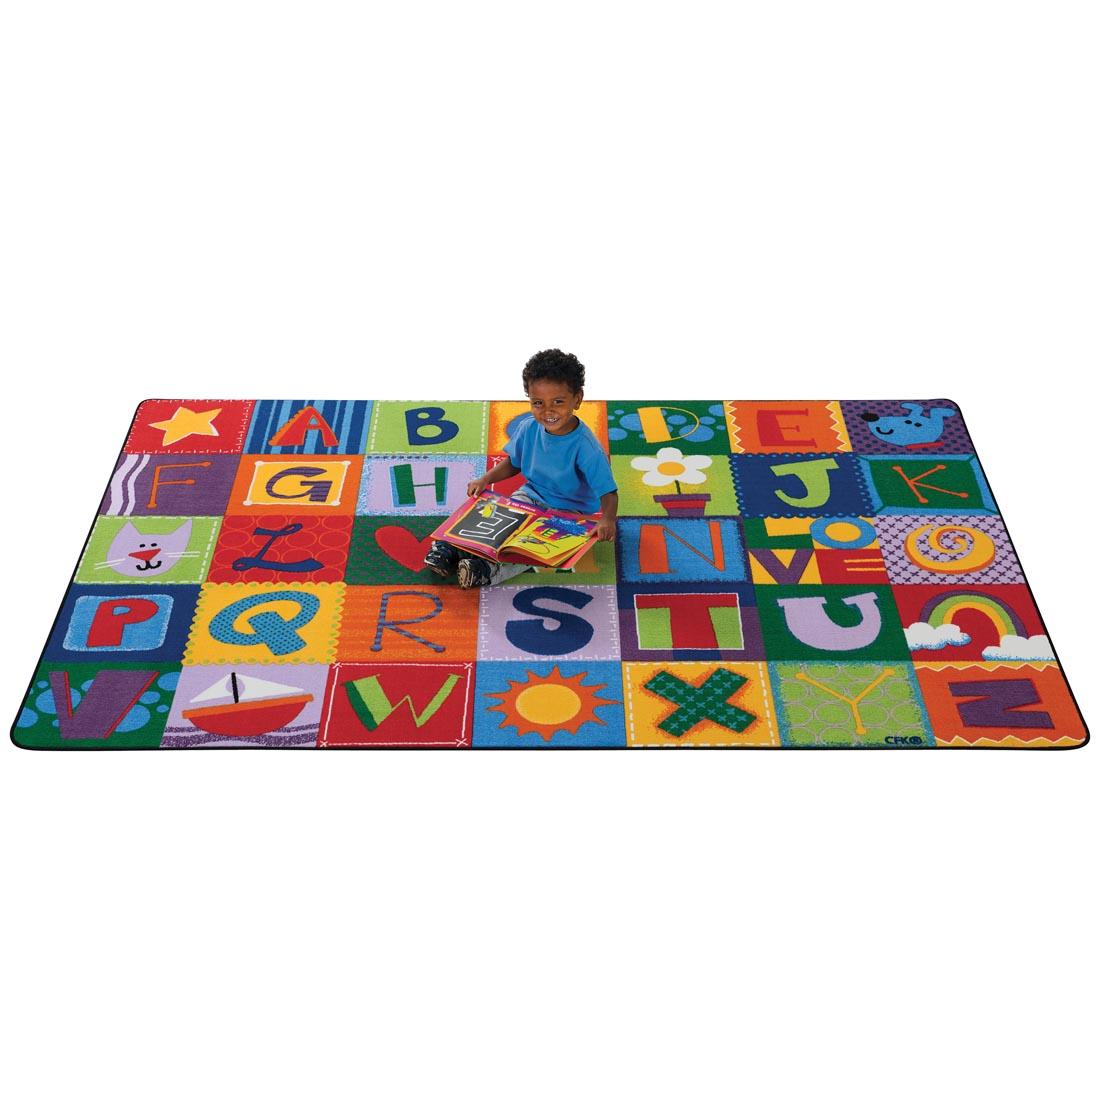 Child with a book sitting on the Toddler Alphabet Blocks Rug by Carpets For Kids